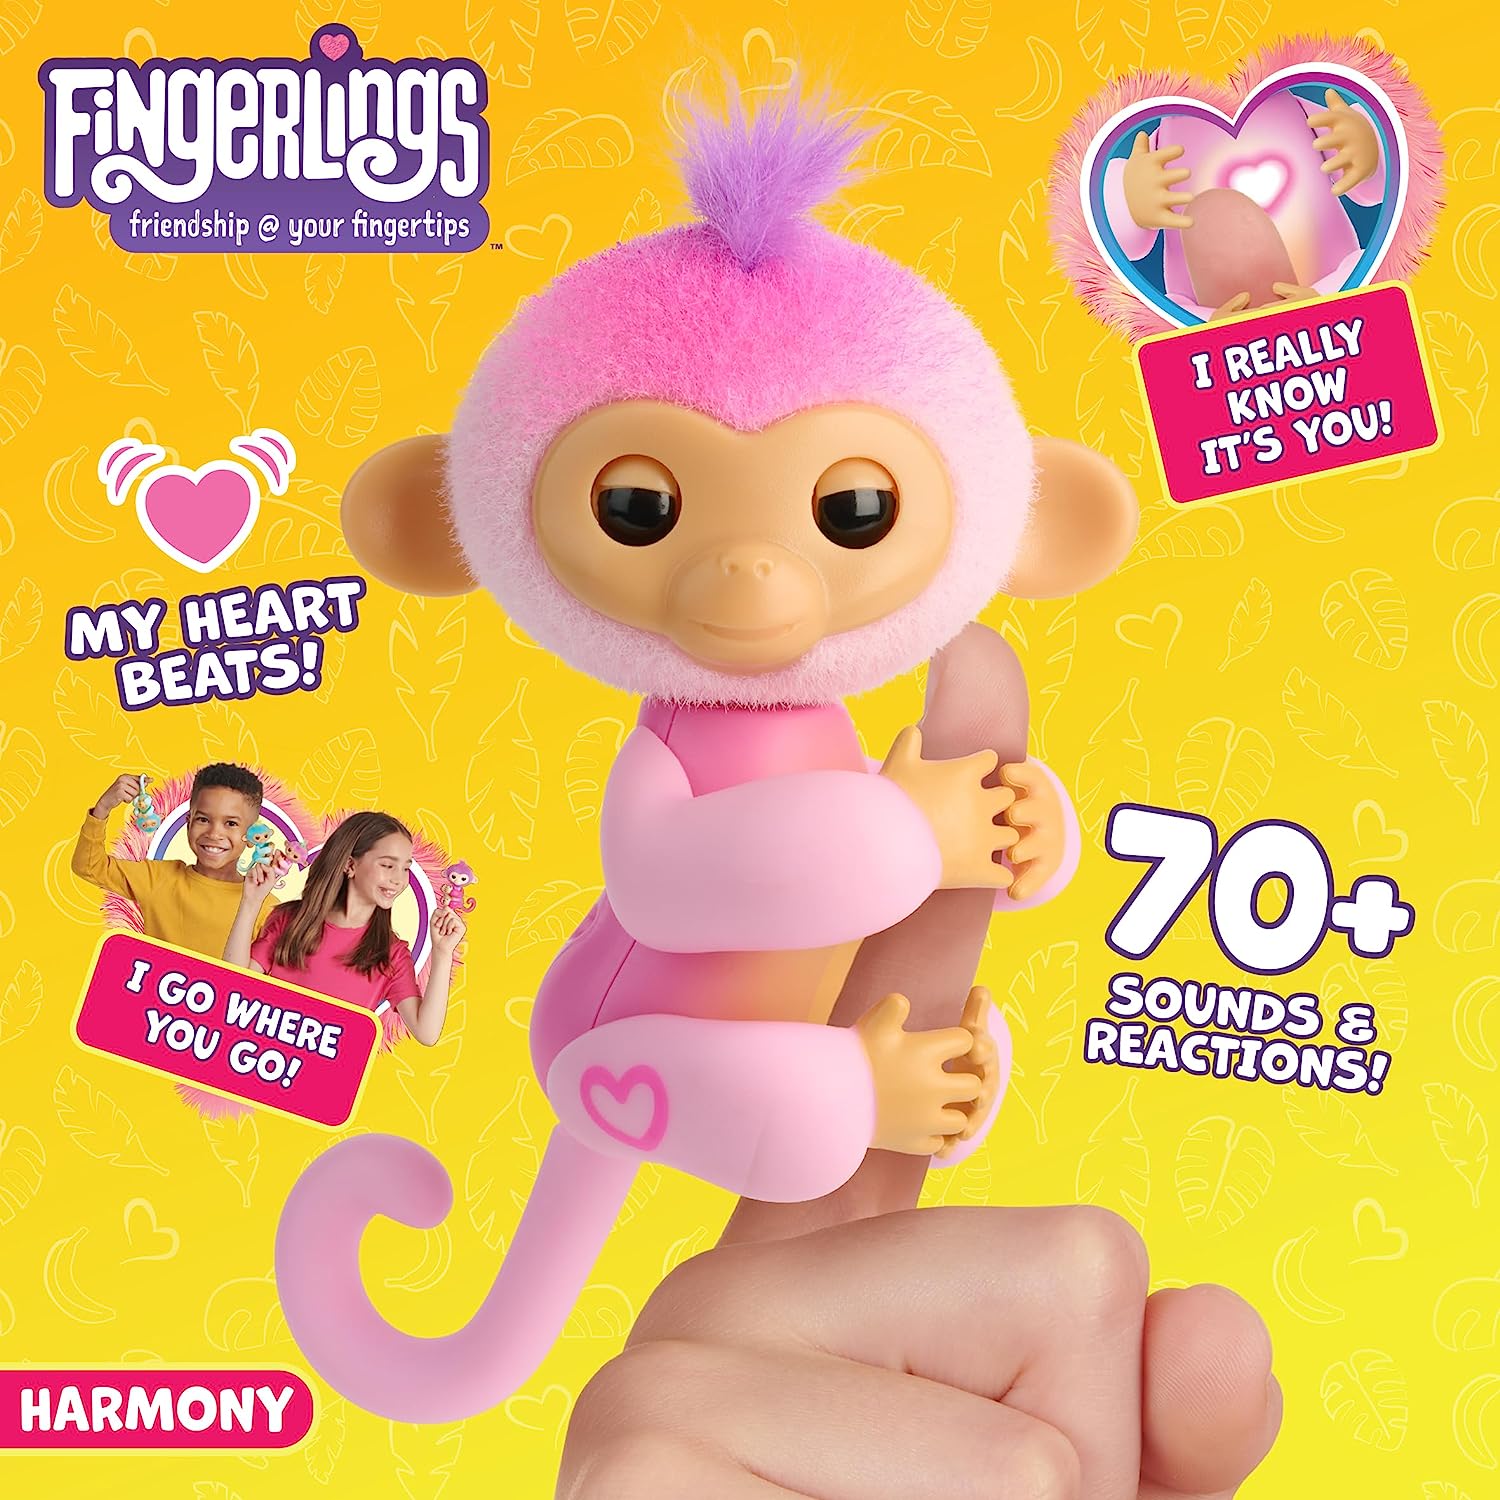 Fingerlings 2023 New Interactive Baby Monkey Reacts To Touch 70+